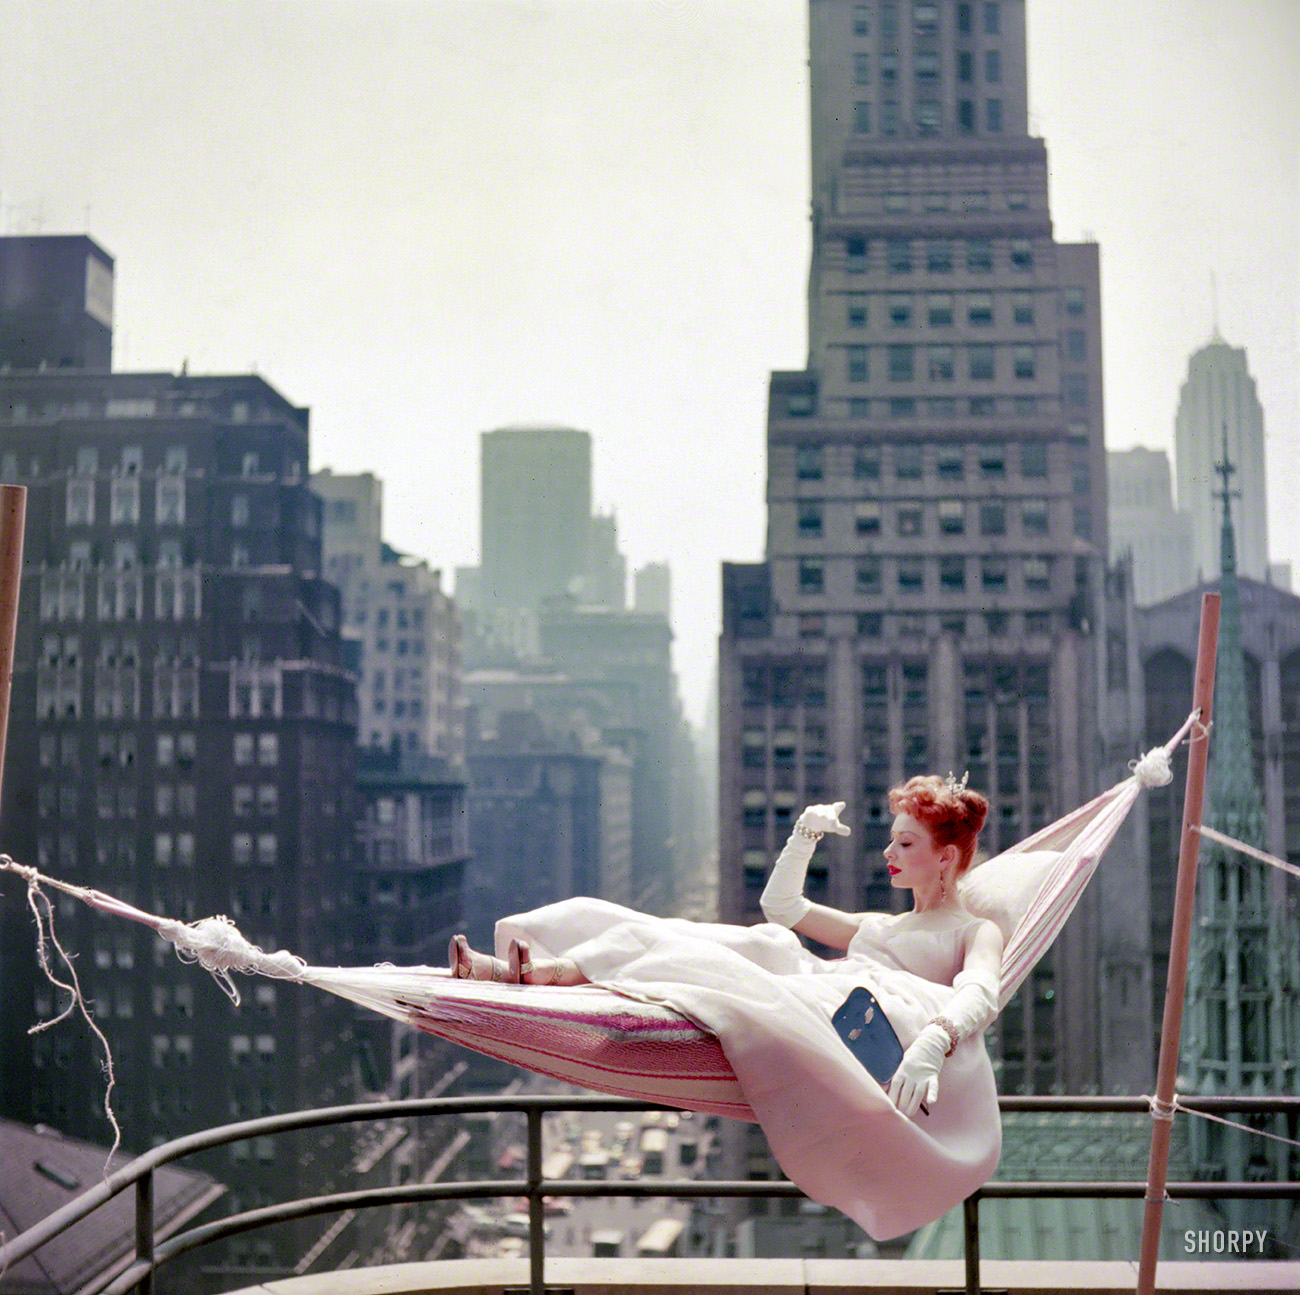 May 1953. "Dancer-actress Gwen Verdon in a hammock wearing a ballgown." Color transparency from photos taken for the Look magazine assignment "Midsummer Fantasies: How to Keep Cool in a Heat Wave." View full size.